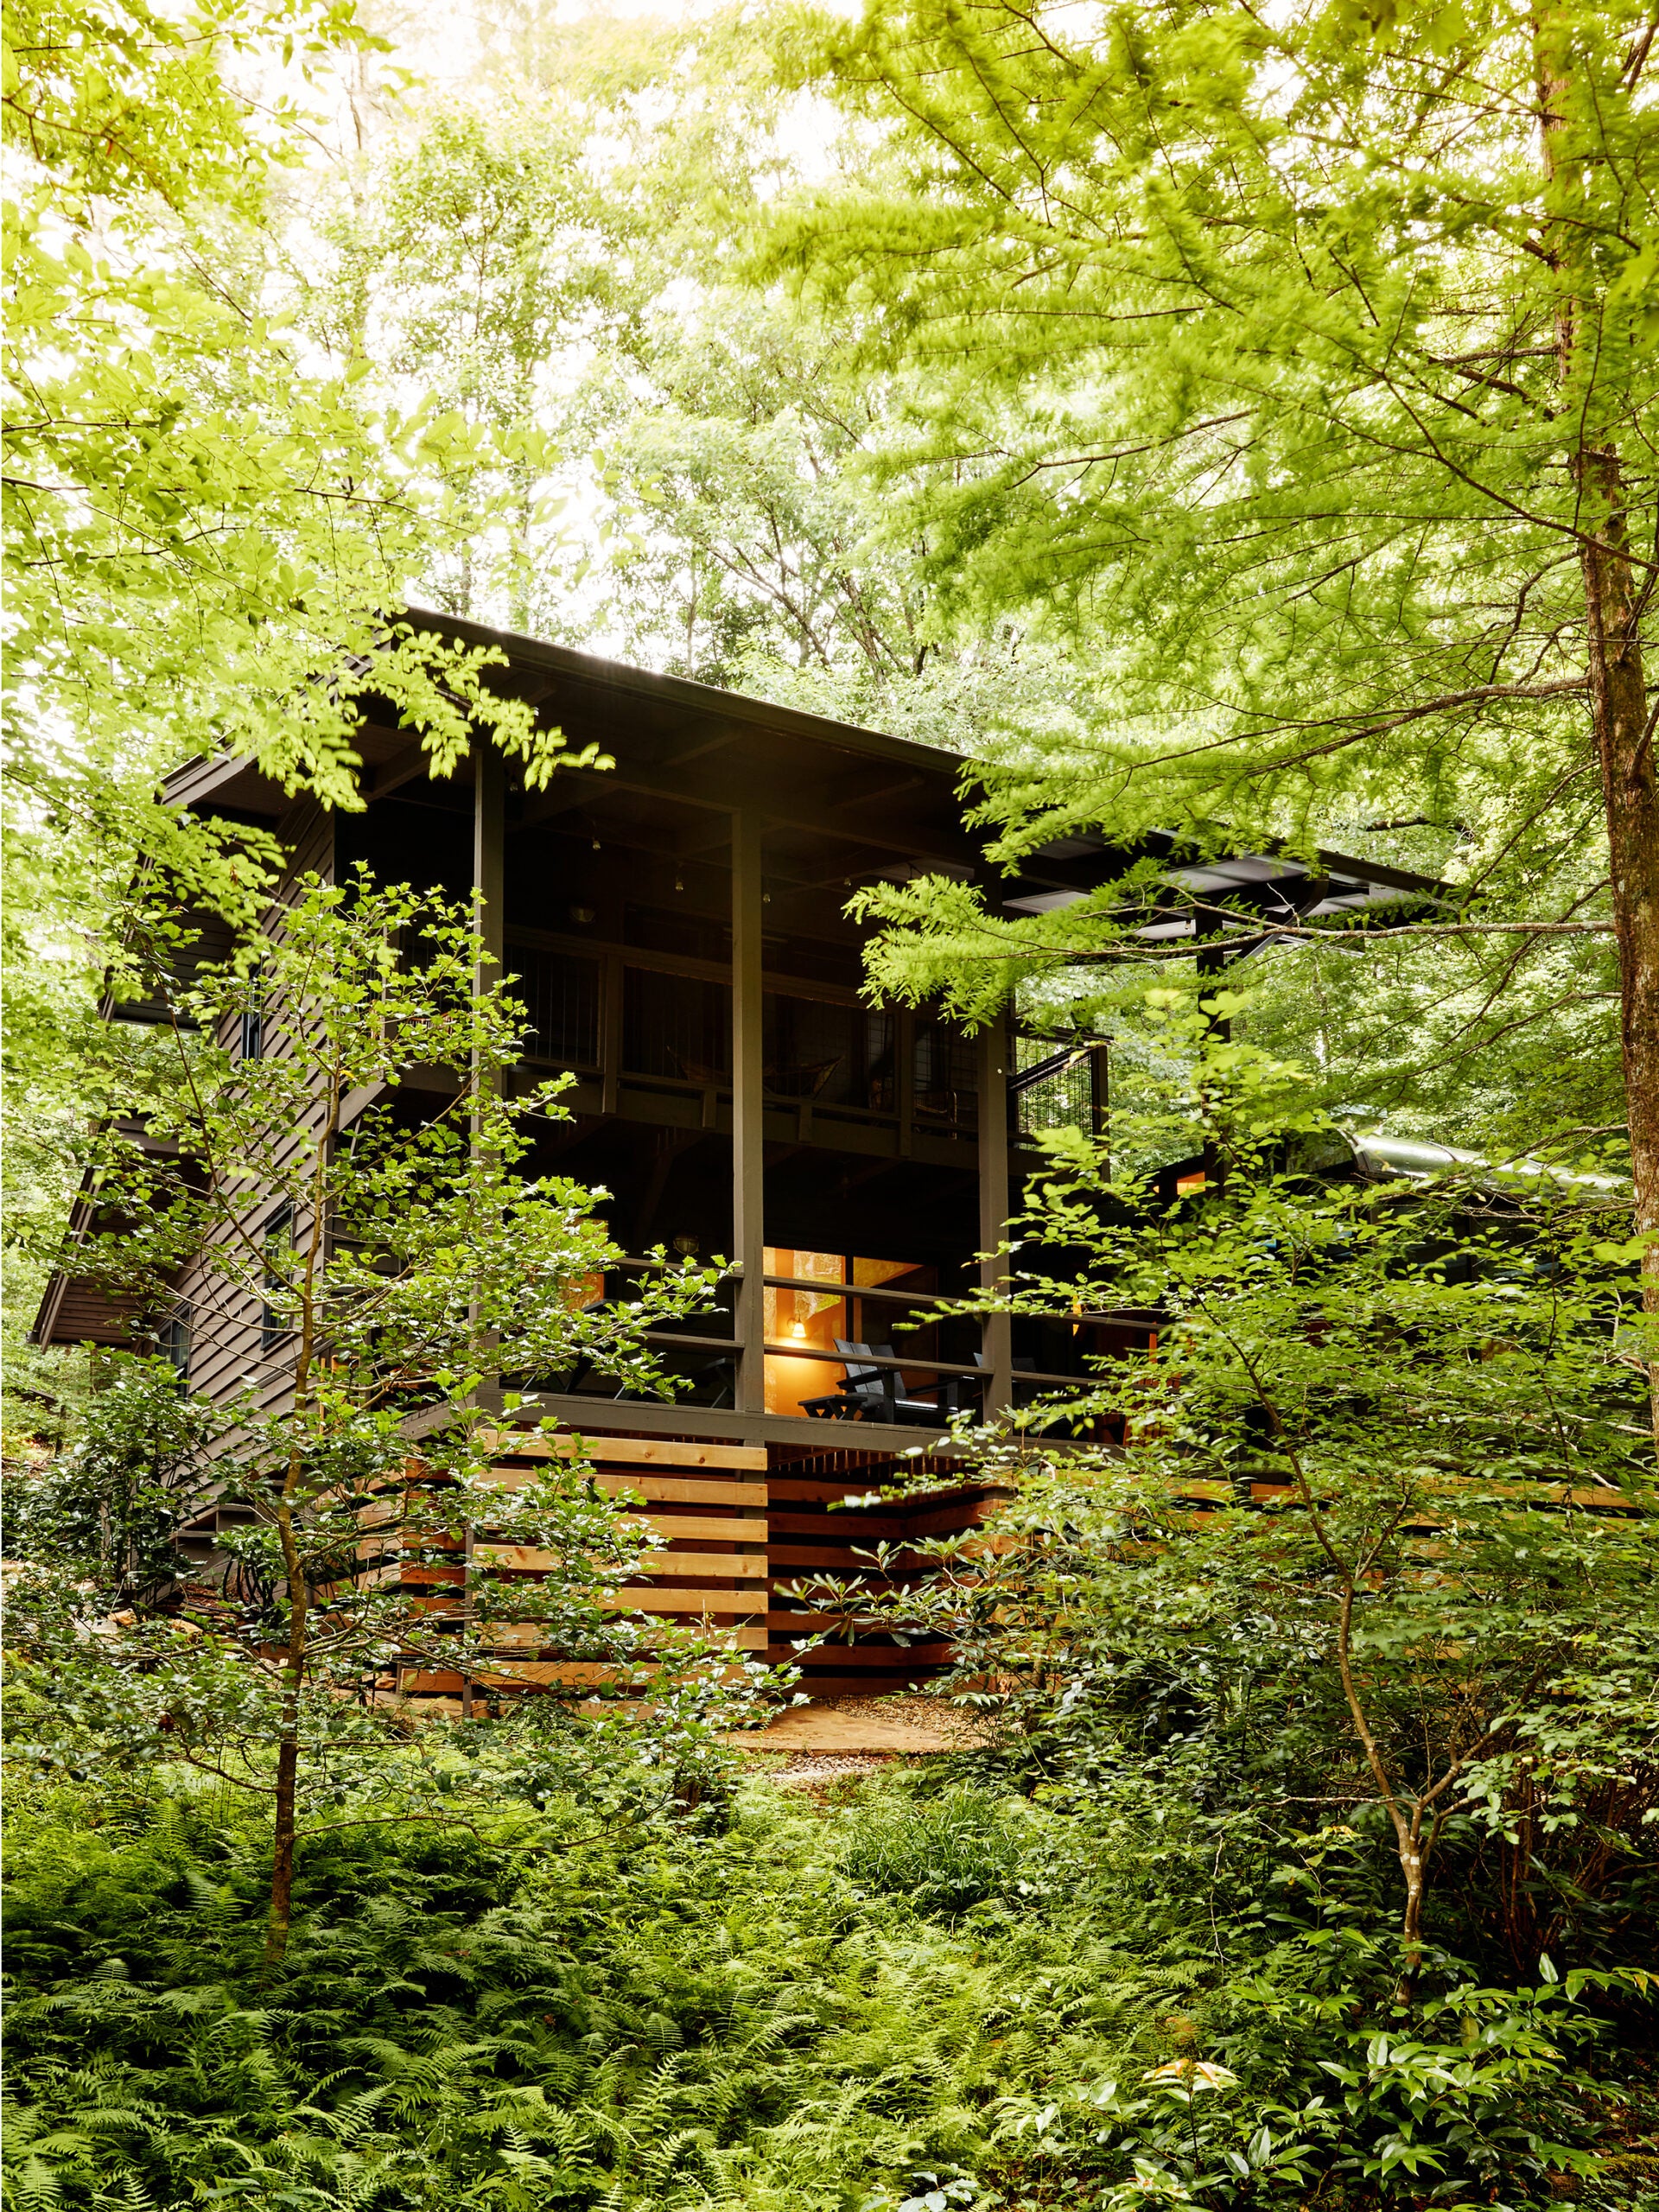 Color Complements All the Wood Details in This '70s Home Turned Modern Cabin